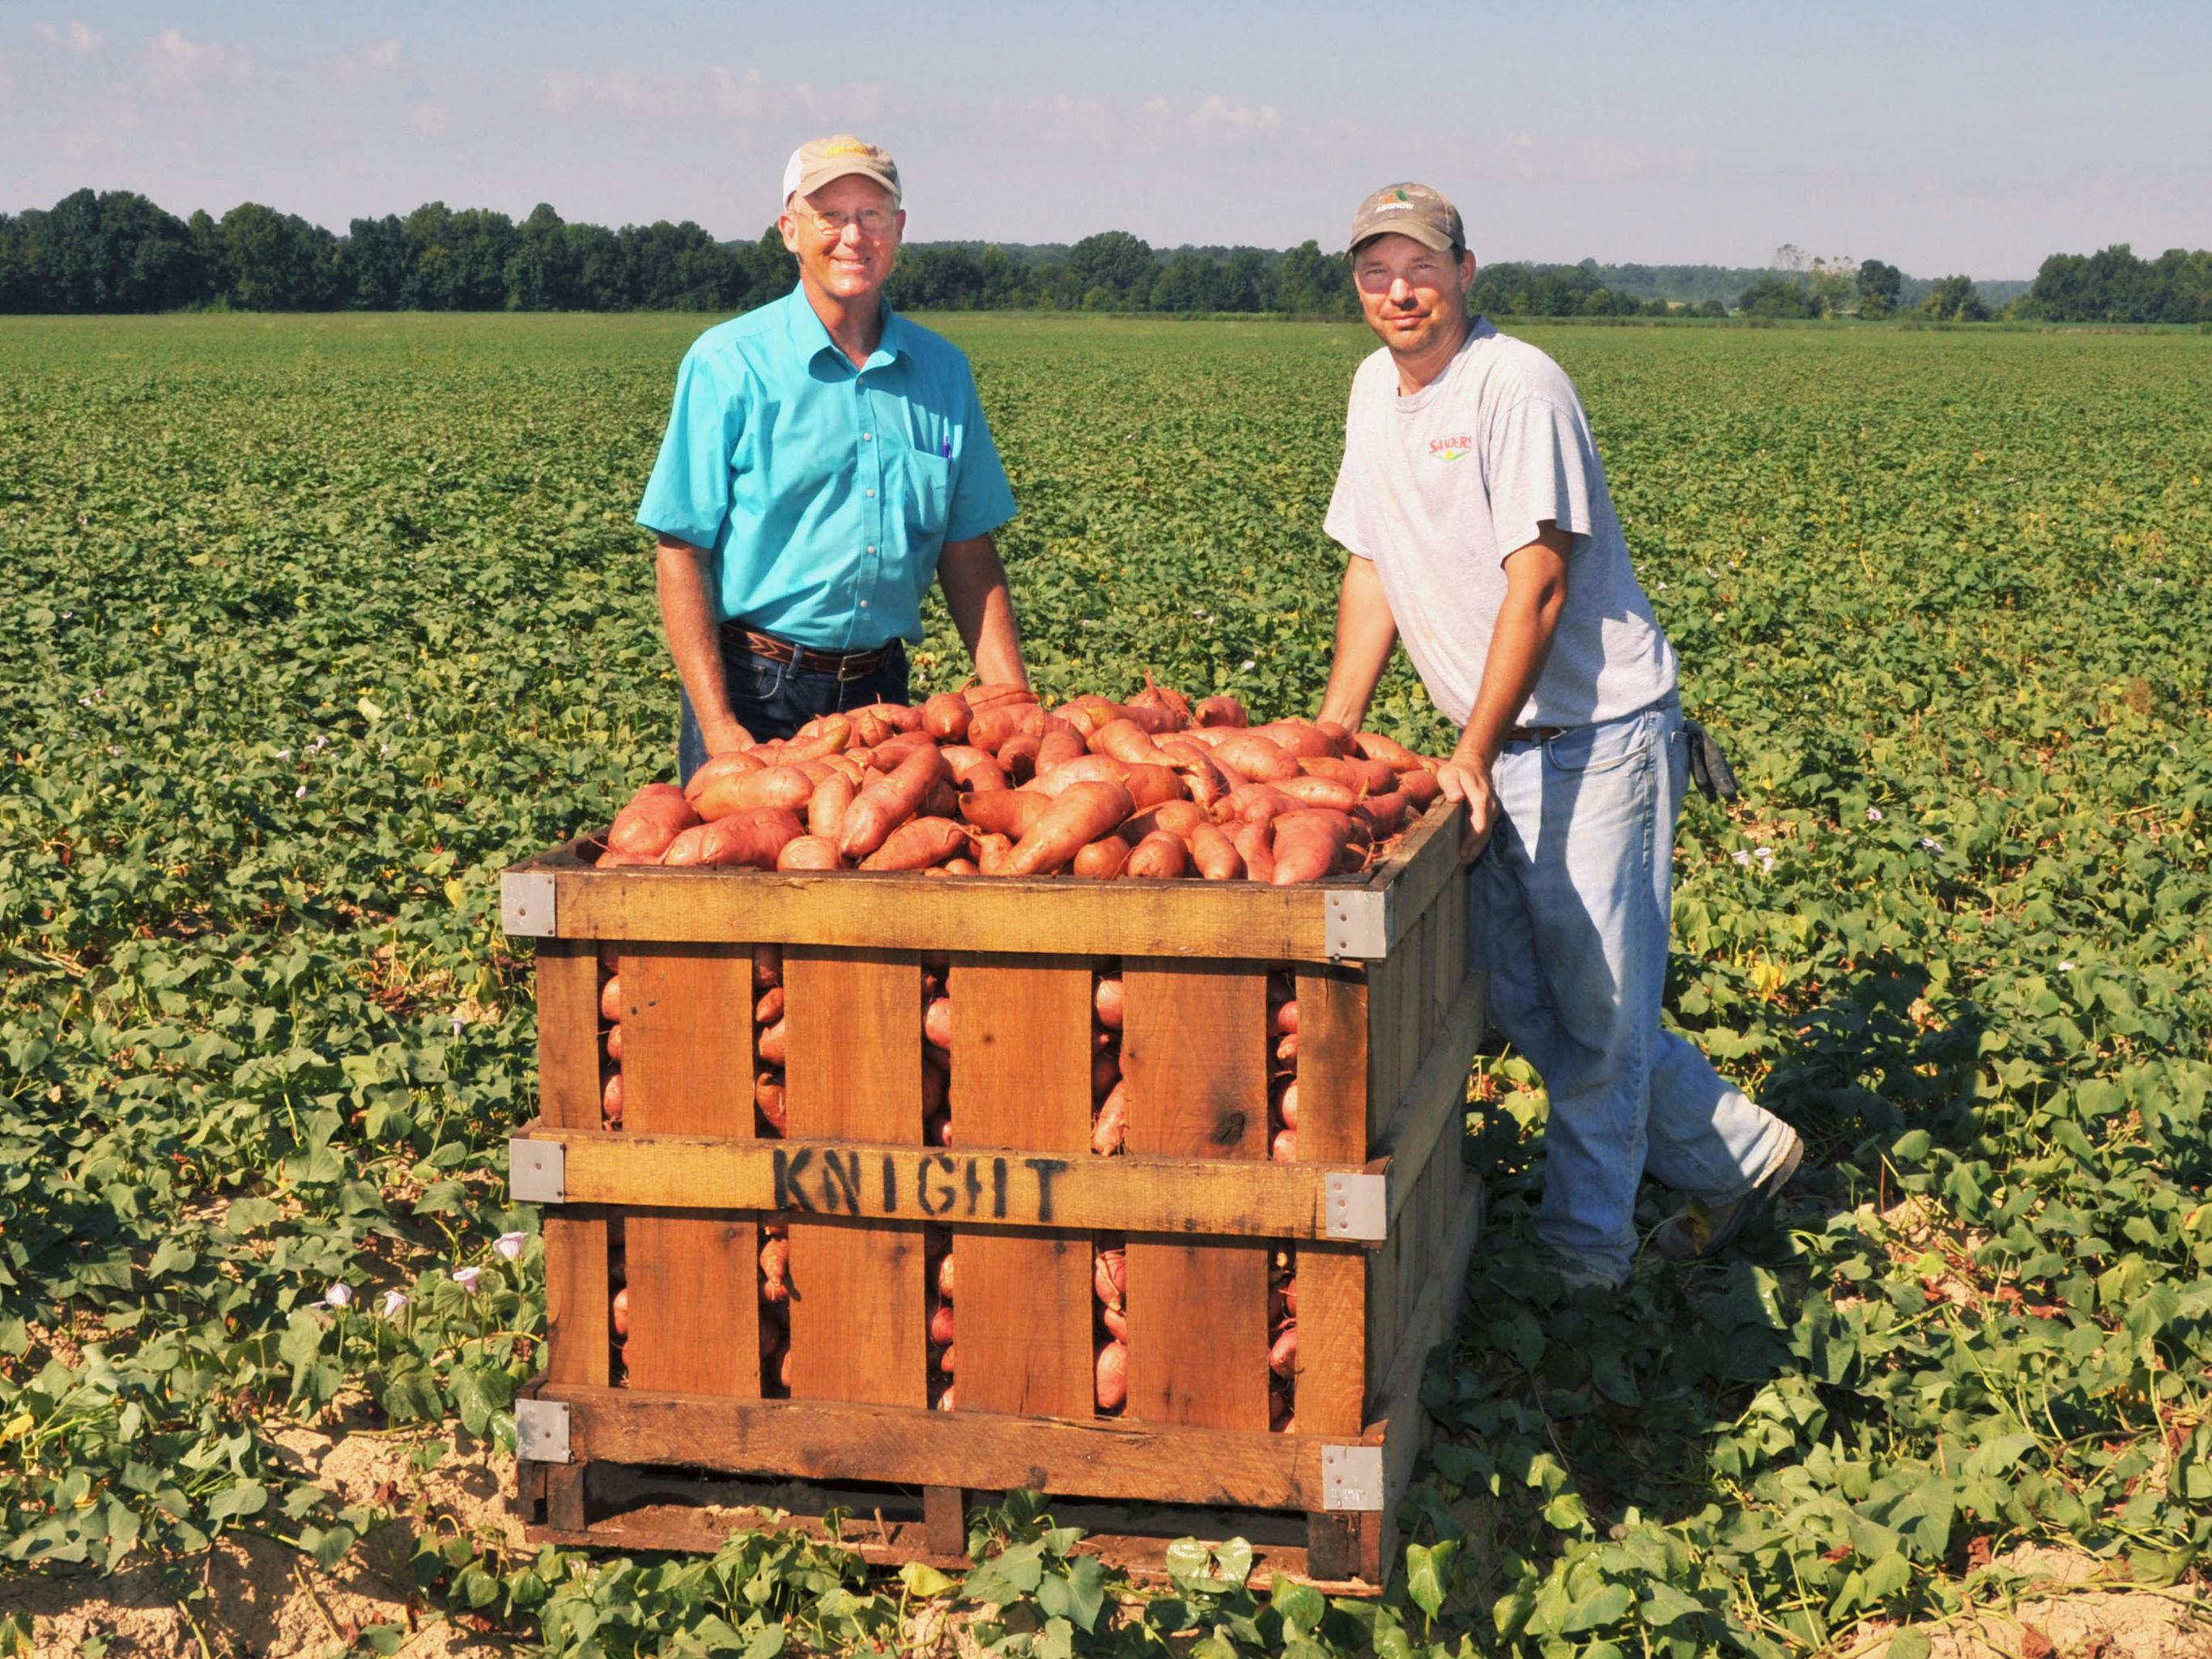 Benny Graves, executive director of the Mississippi Sweet Potato Council and Matthew Knight, a grower in Webster County, inspect harvested sweet potatoes on Sept. 4, 2013. (Photo by MSU Ag Communications/Scott Corey)